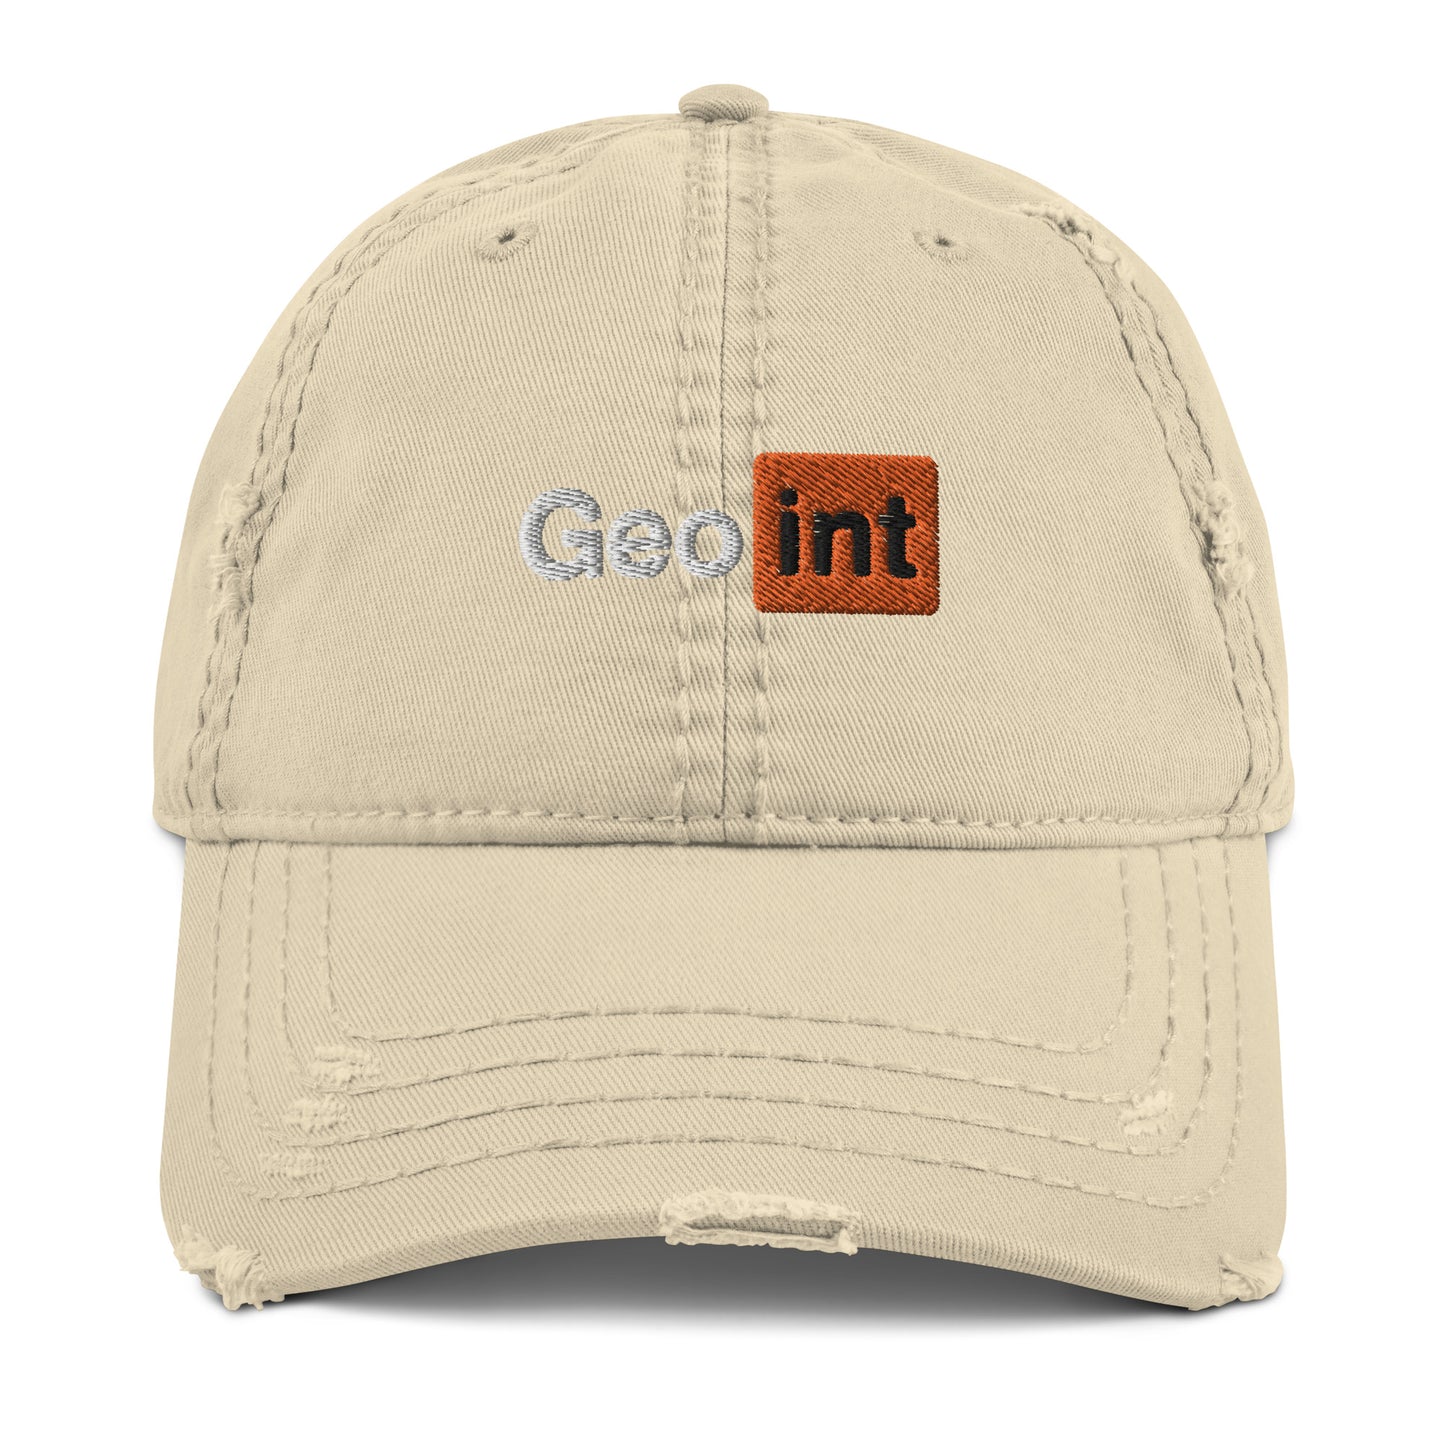 Team GEOINT Distressed Hat